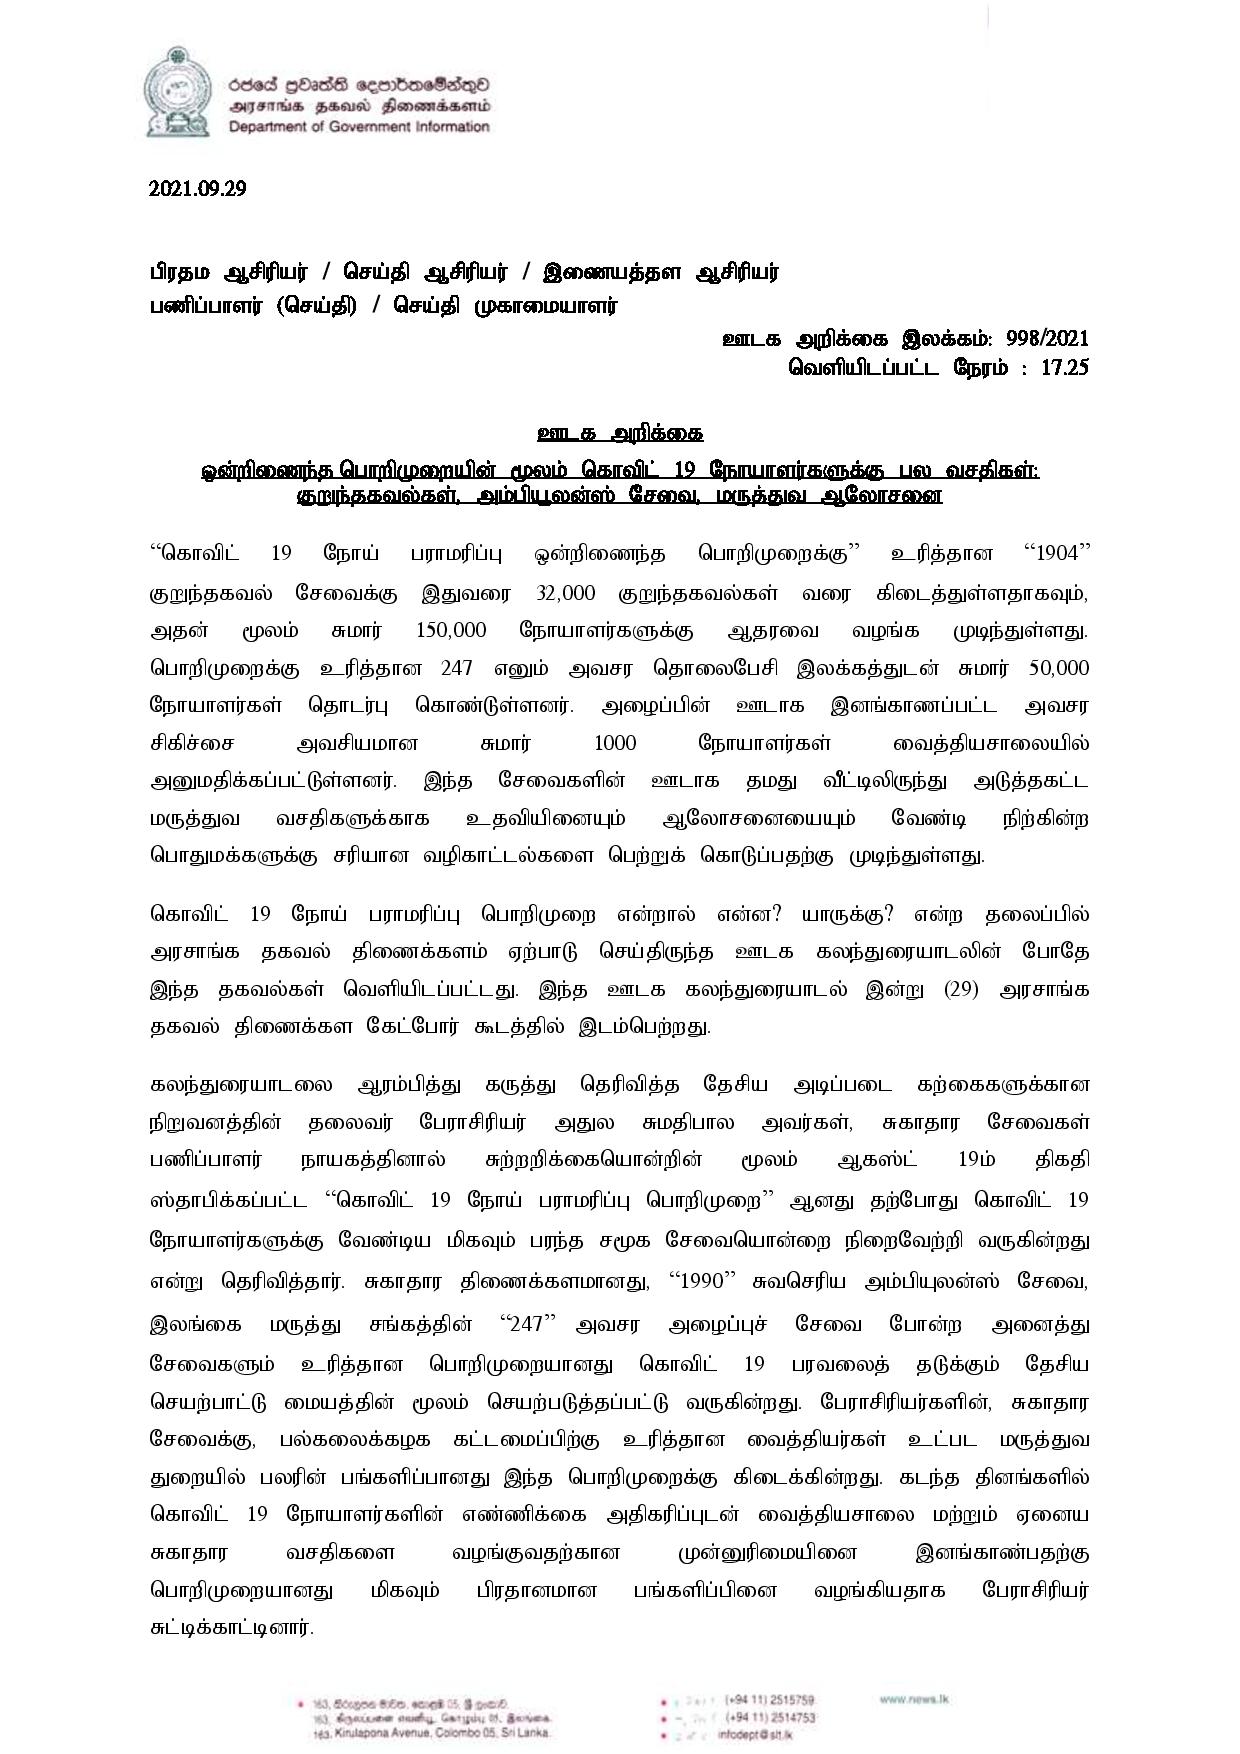 Press Release 998 Tamil 1 page 001